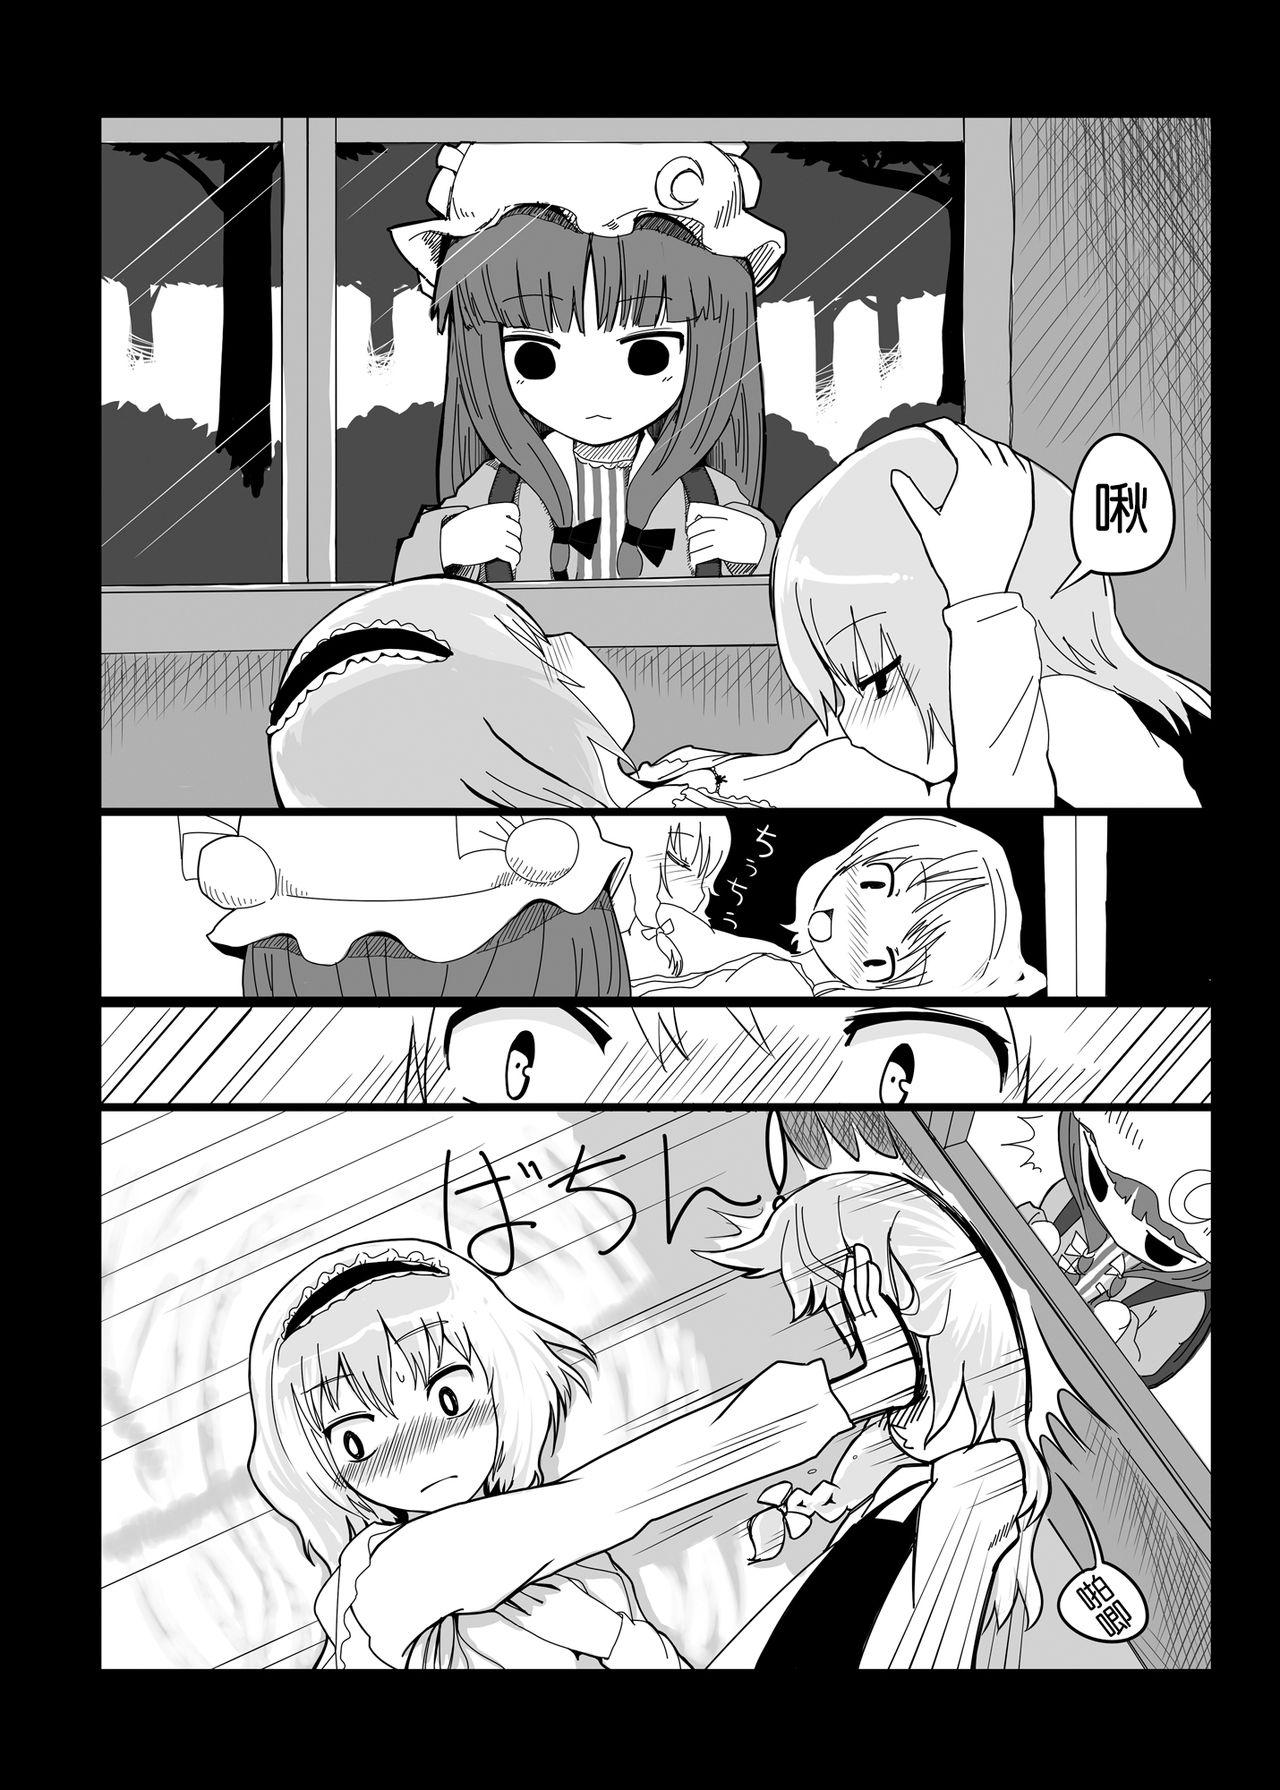 Pussy Touhou Ero Atsume. - Touhou project Big breasts - Page 8